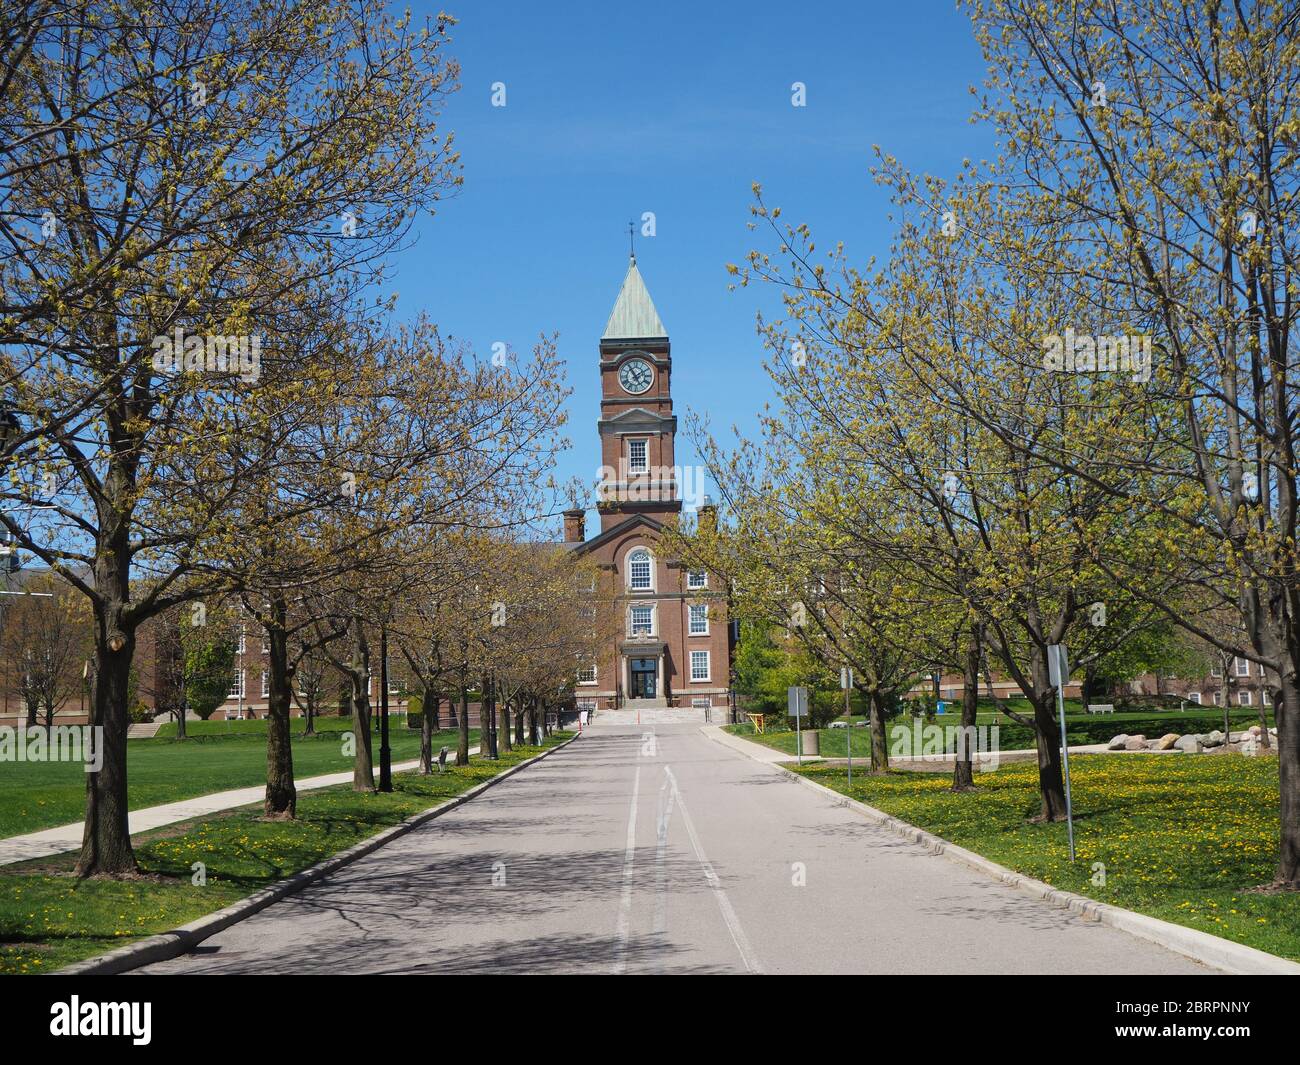 Upper Canada College building, Toronto, with clock tower behind avenue of trees Stock Photo